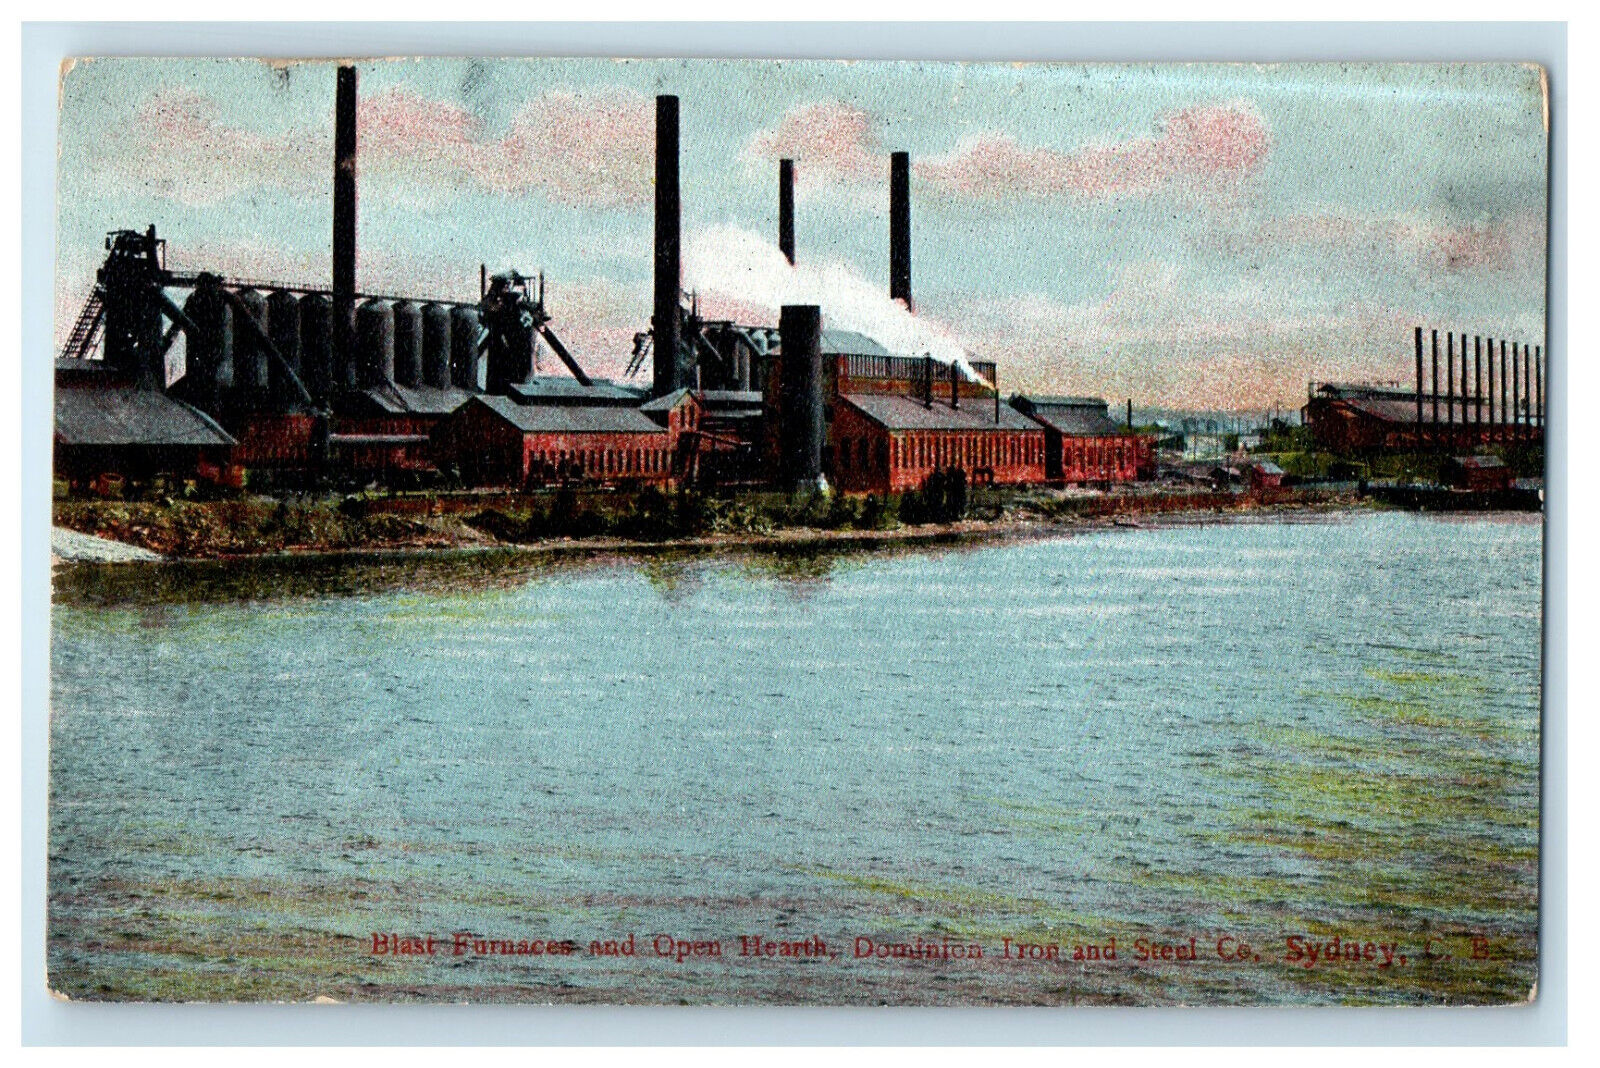 1907 Blast Furnaces and Open Hearth Dominion Iron and Steel Co Sydney Postcard